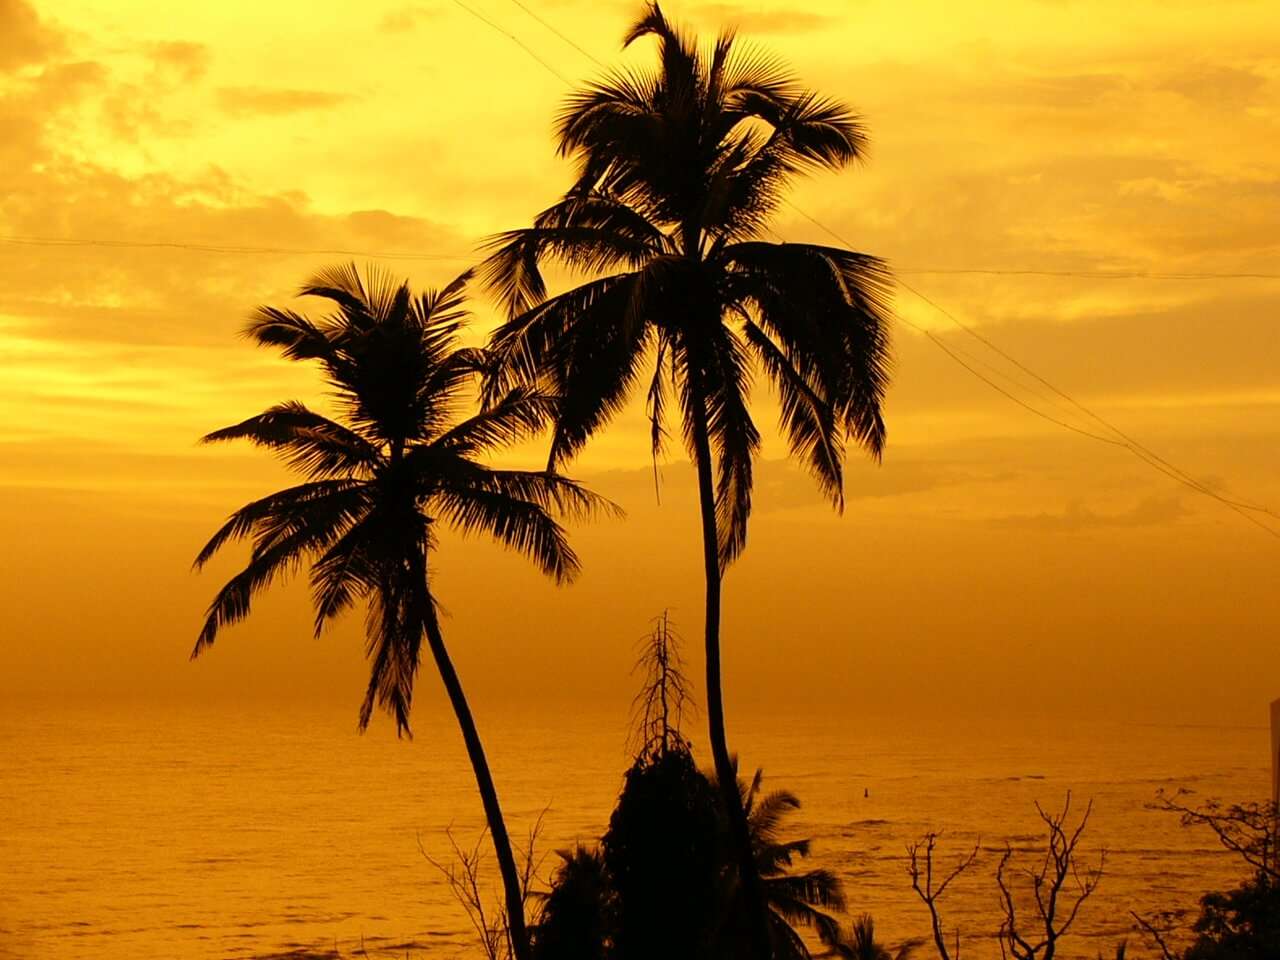 Palm trees on beach during sunset